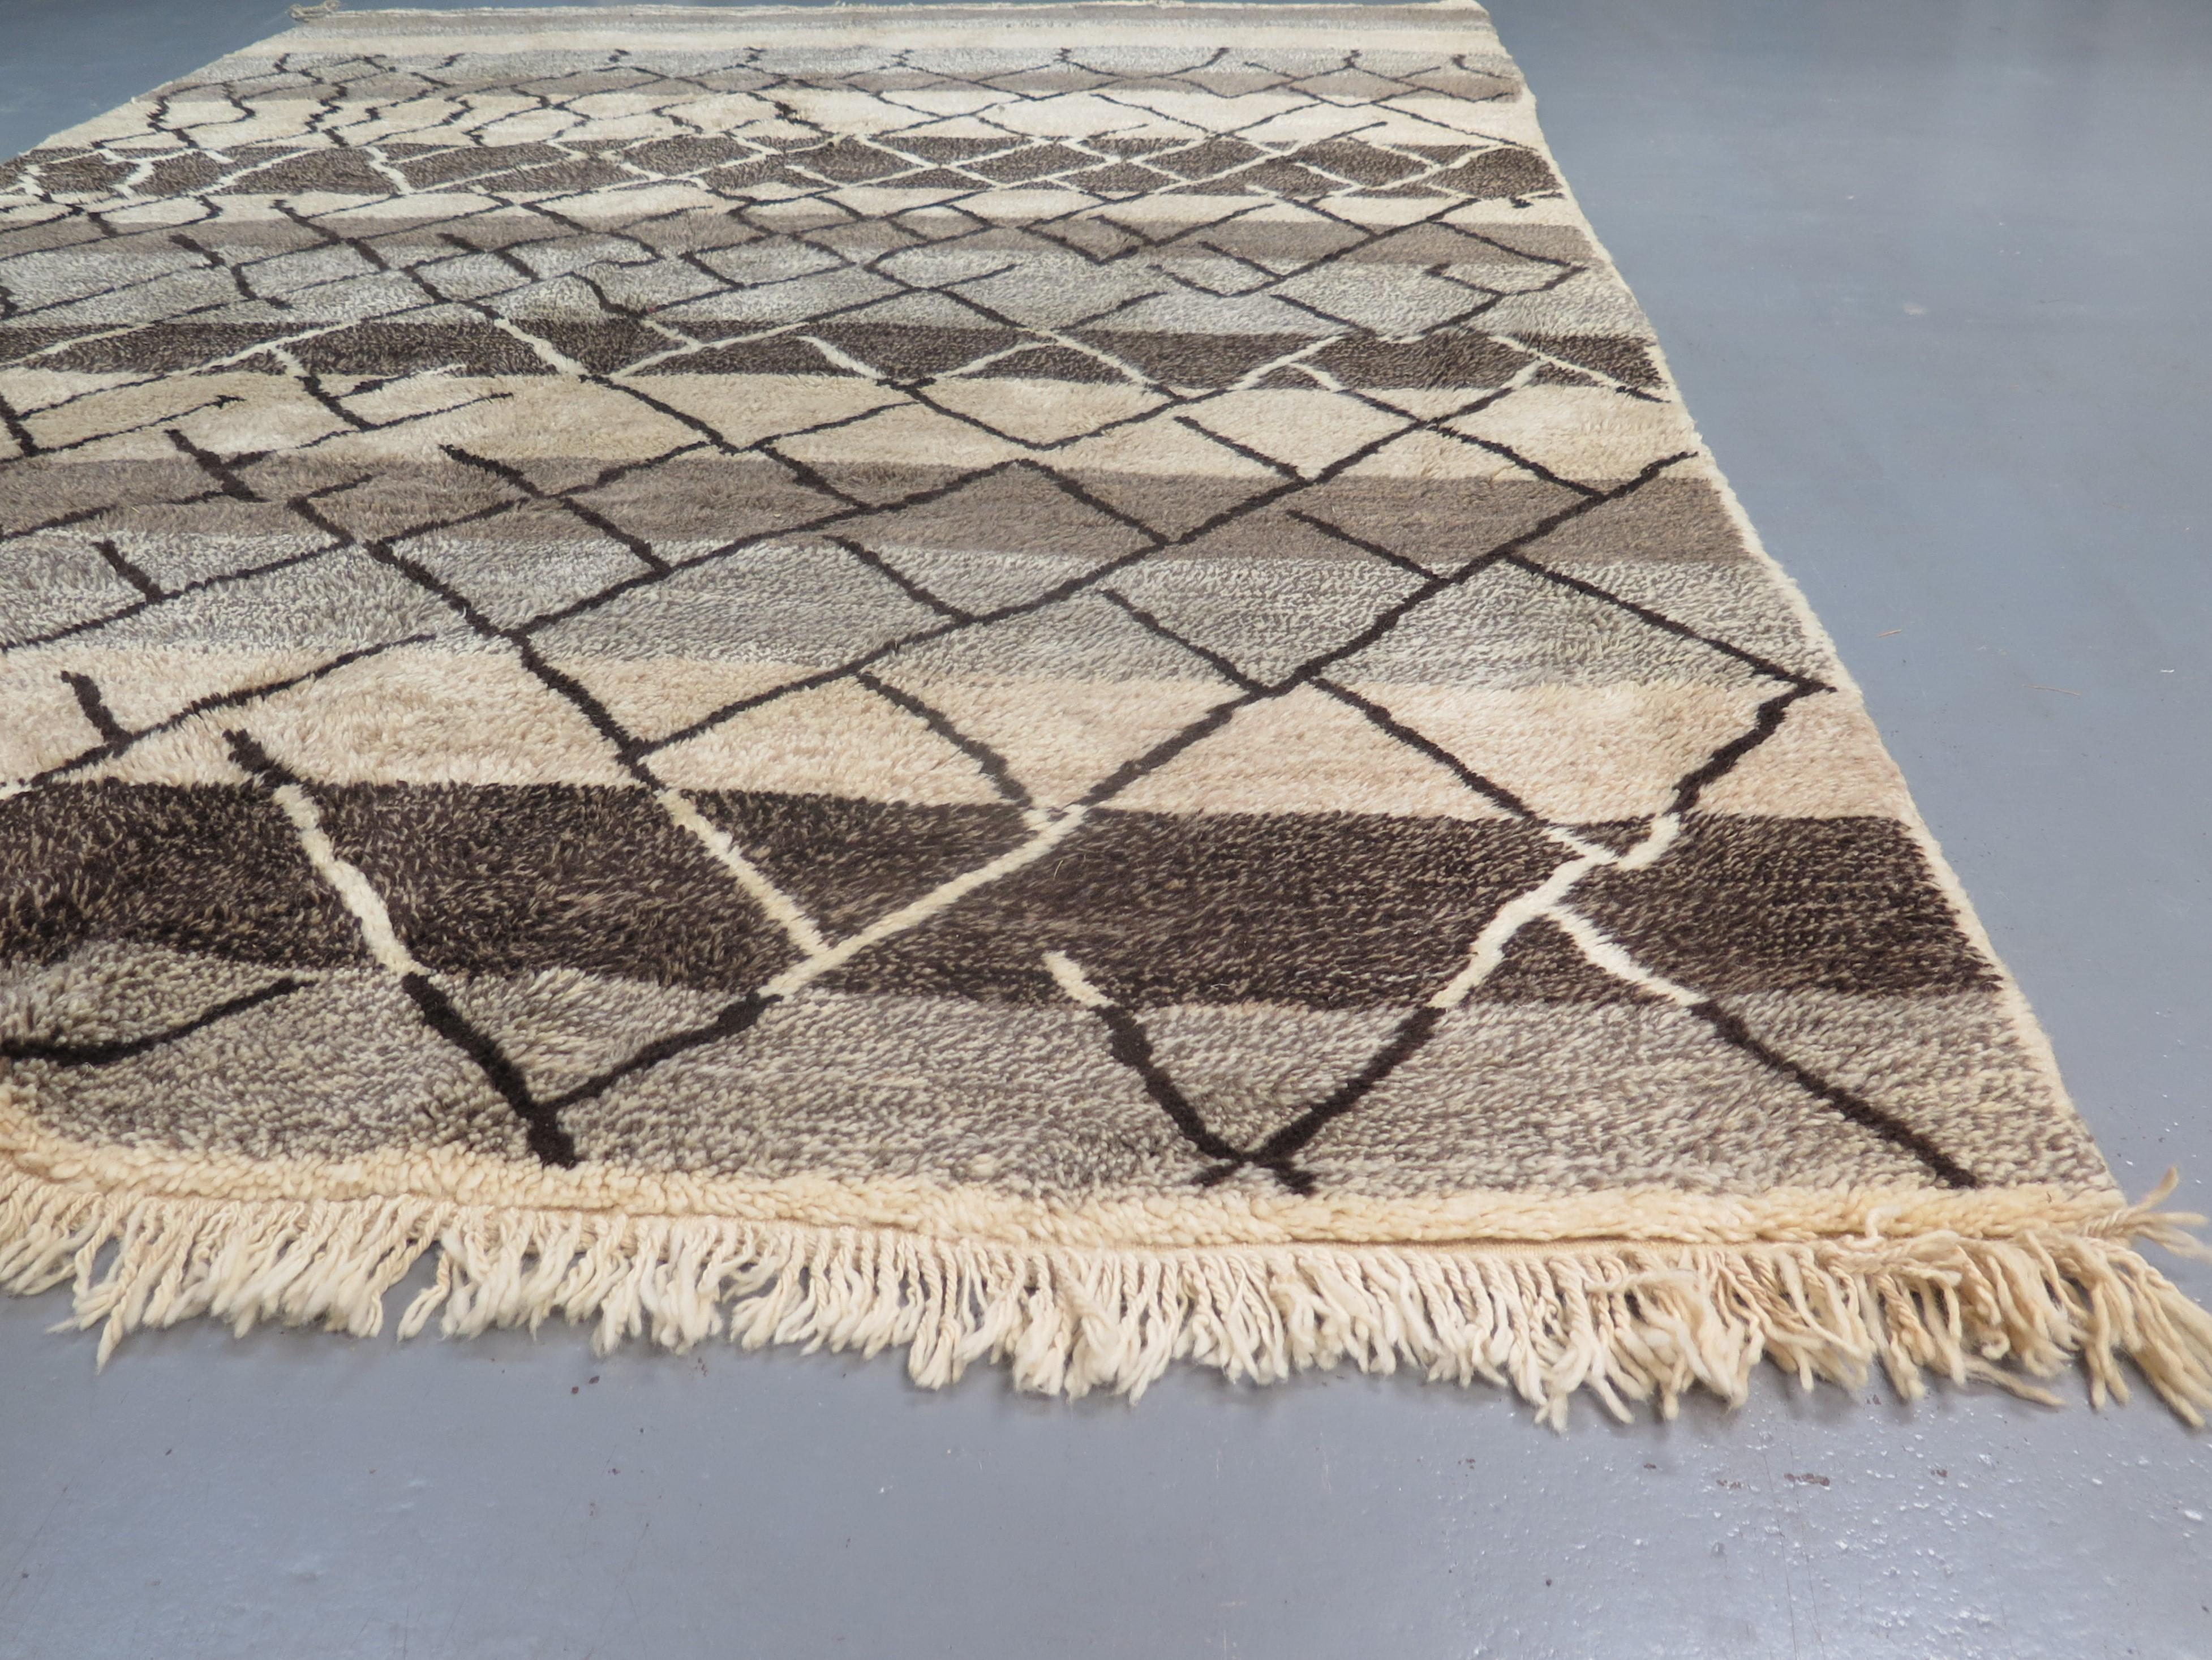 A contemporary Moroccan carpet, hand-knotted in high-grade wool, inspired by highly-sought after Mid-Century Modern Beni Ourain weavings, made popular by such designers as Alvar Aalto and Le Corbusier.

The natural abrash – or, colour variation –